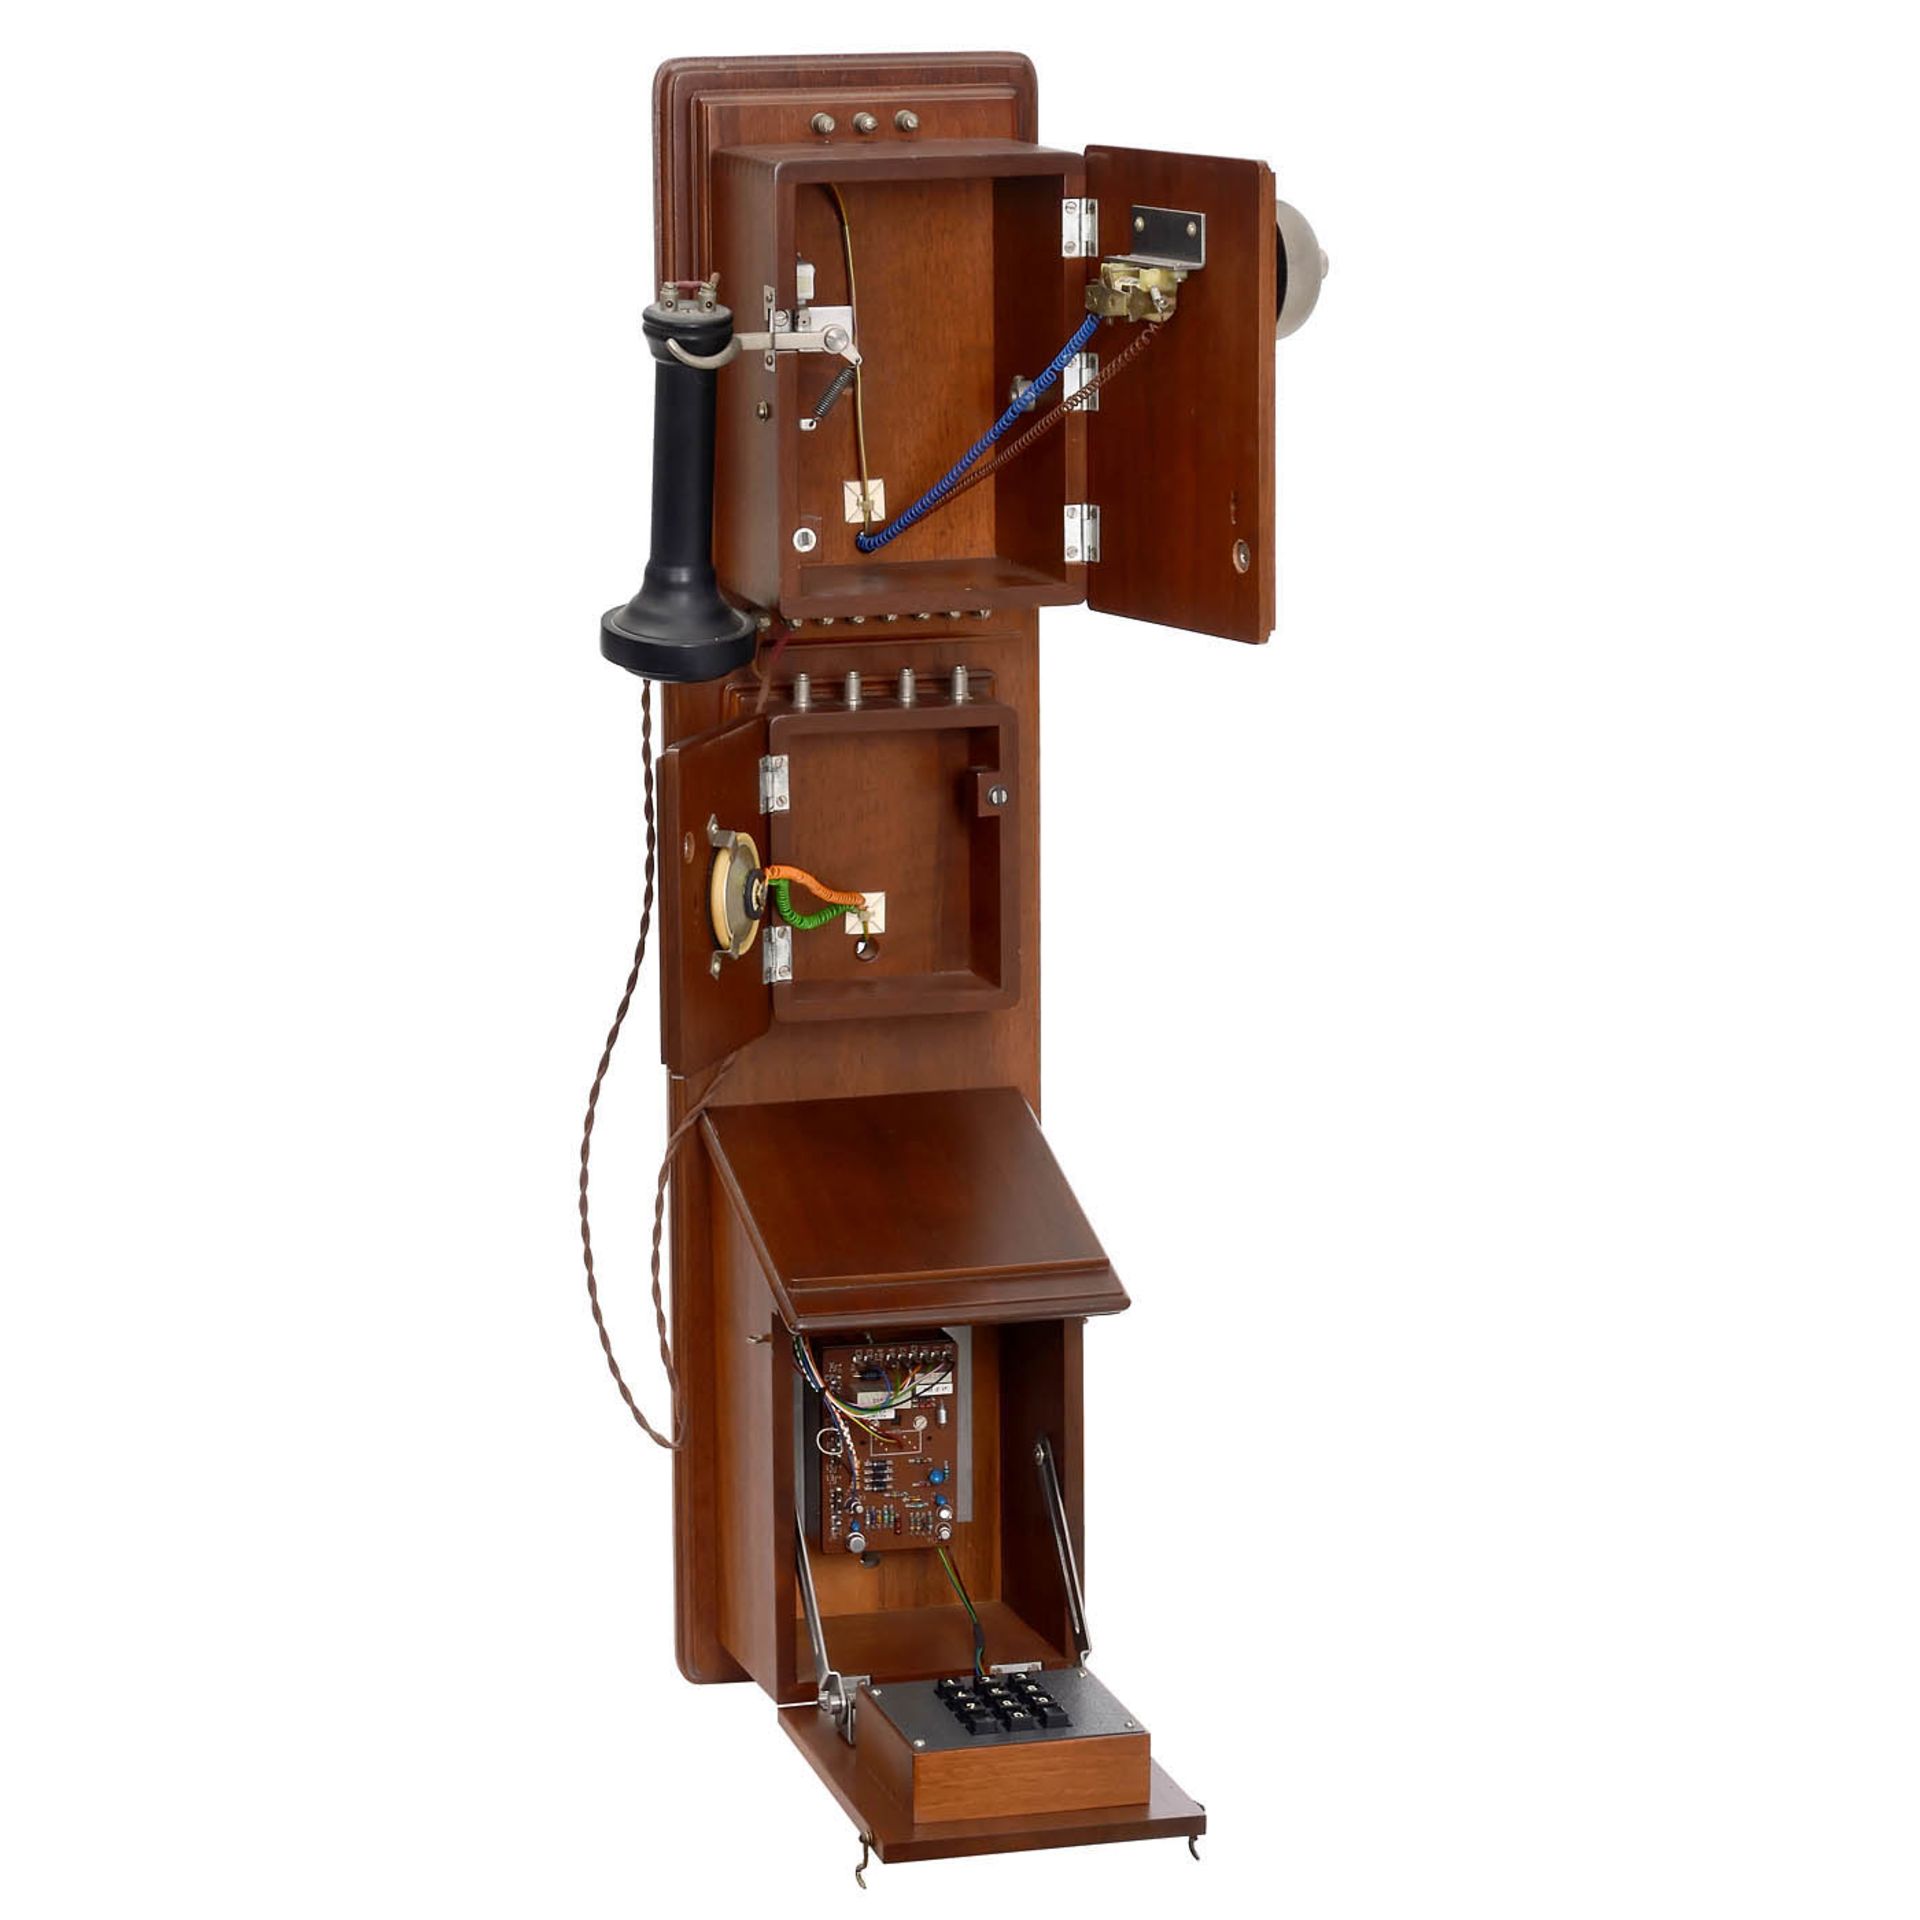 Limited Edition "100 Years Bell Telephone", 1982 - Bild 2 aus 2